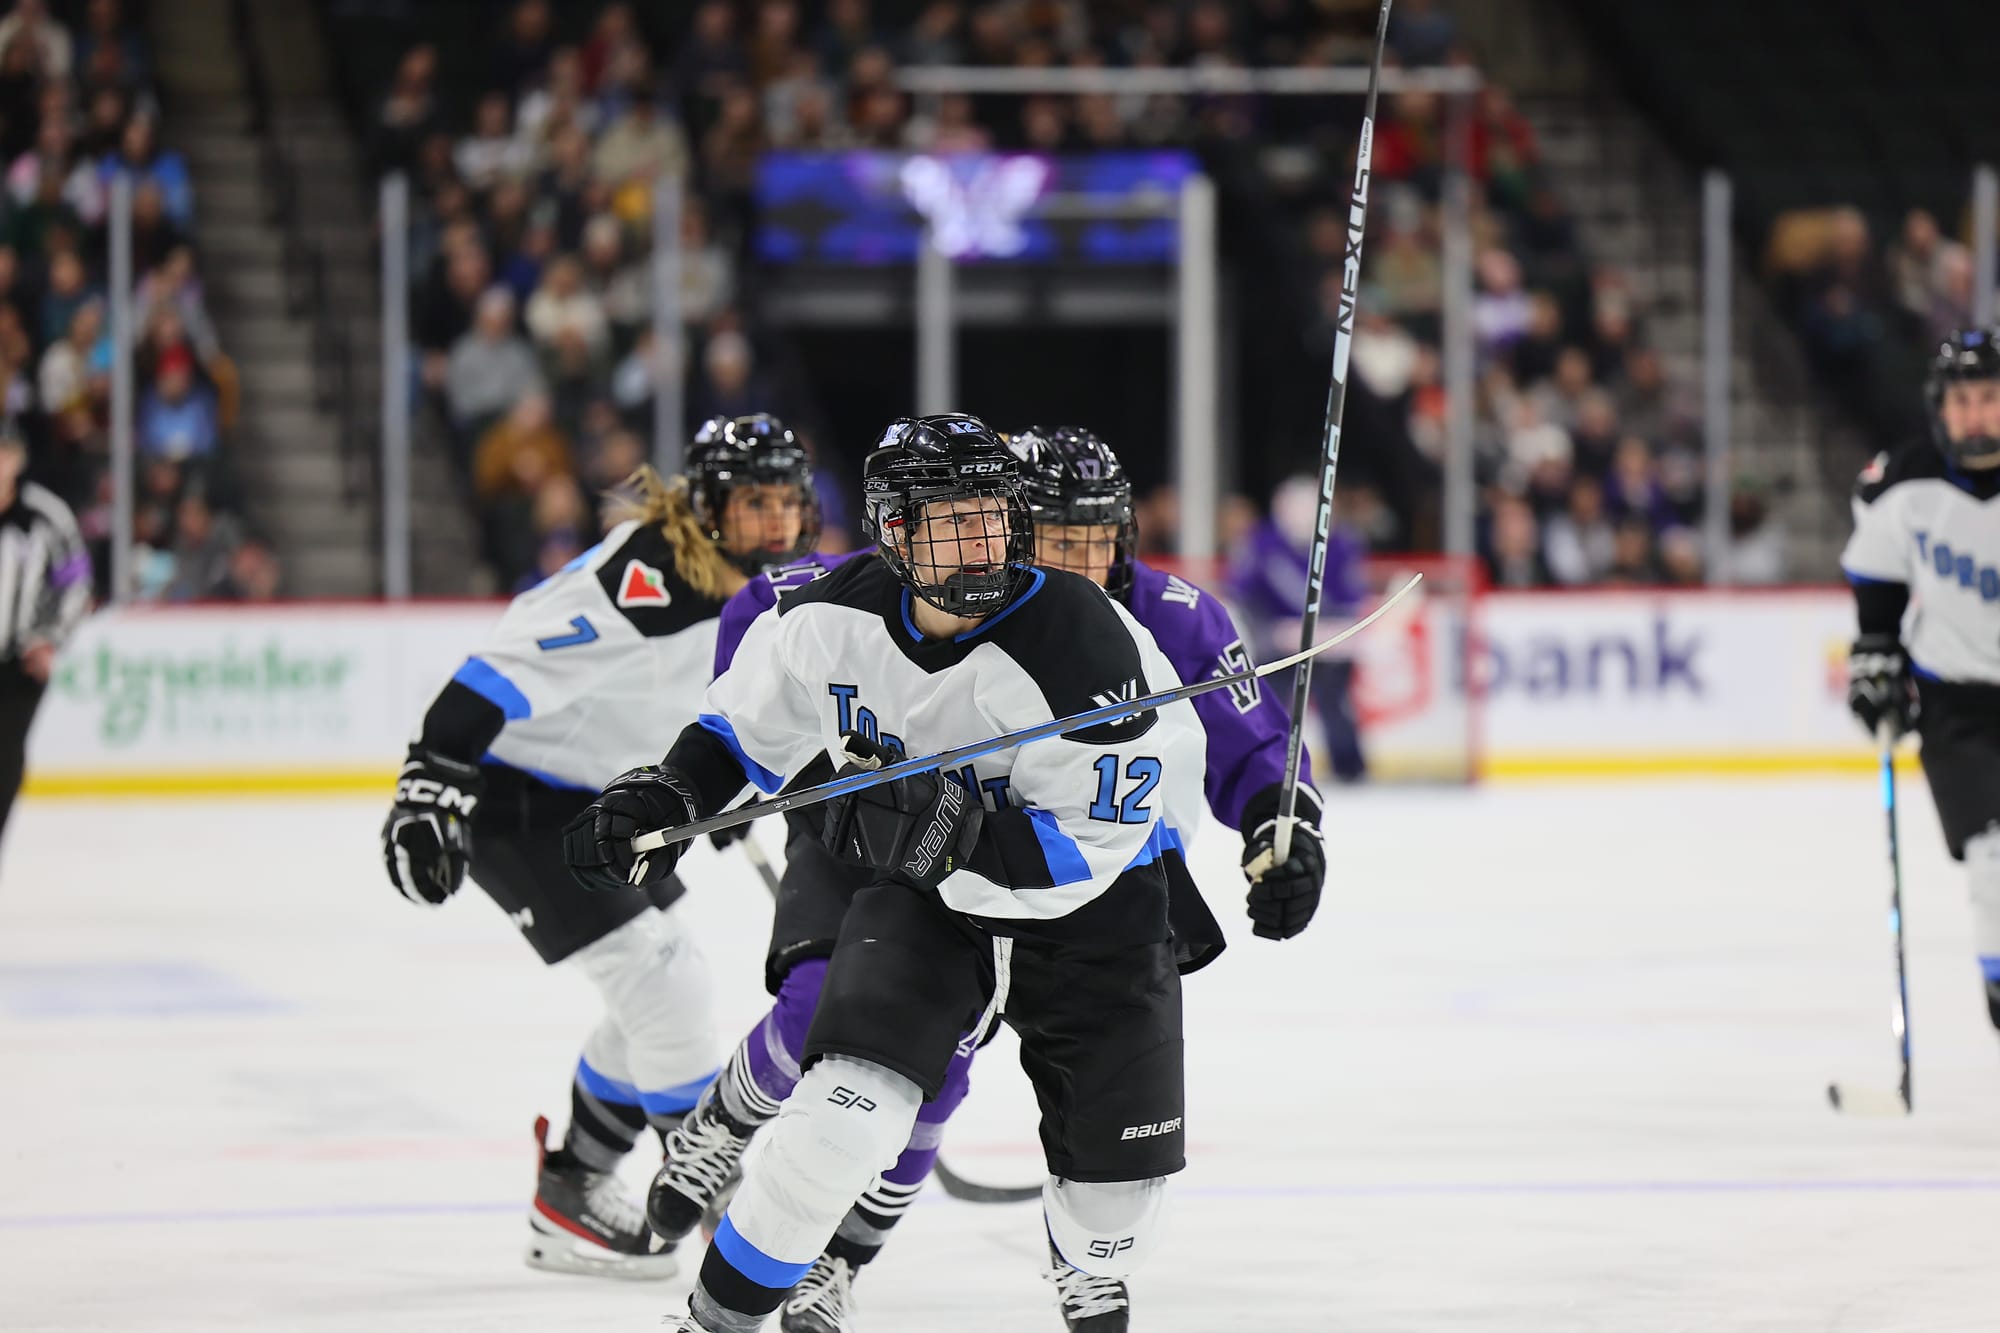 Allie Monroe, wearing a white away uniform, races for the puck against Minnesota's Brooke Bryant, wearing a purple away uniform.. 